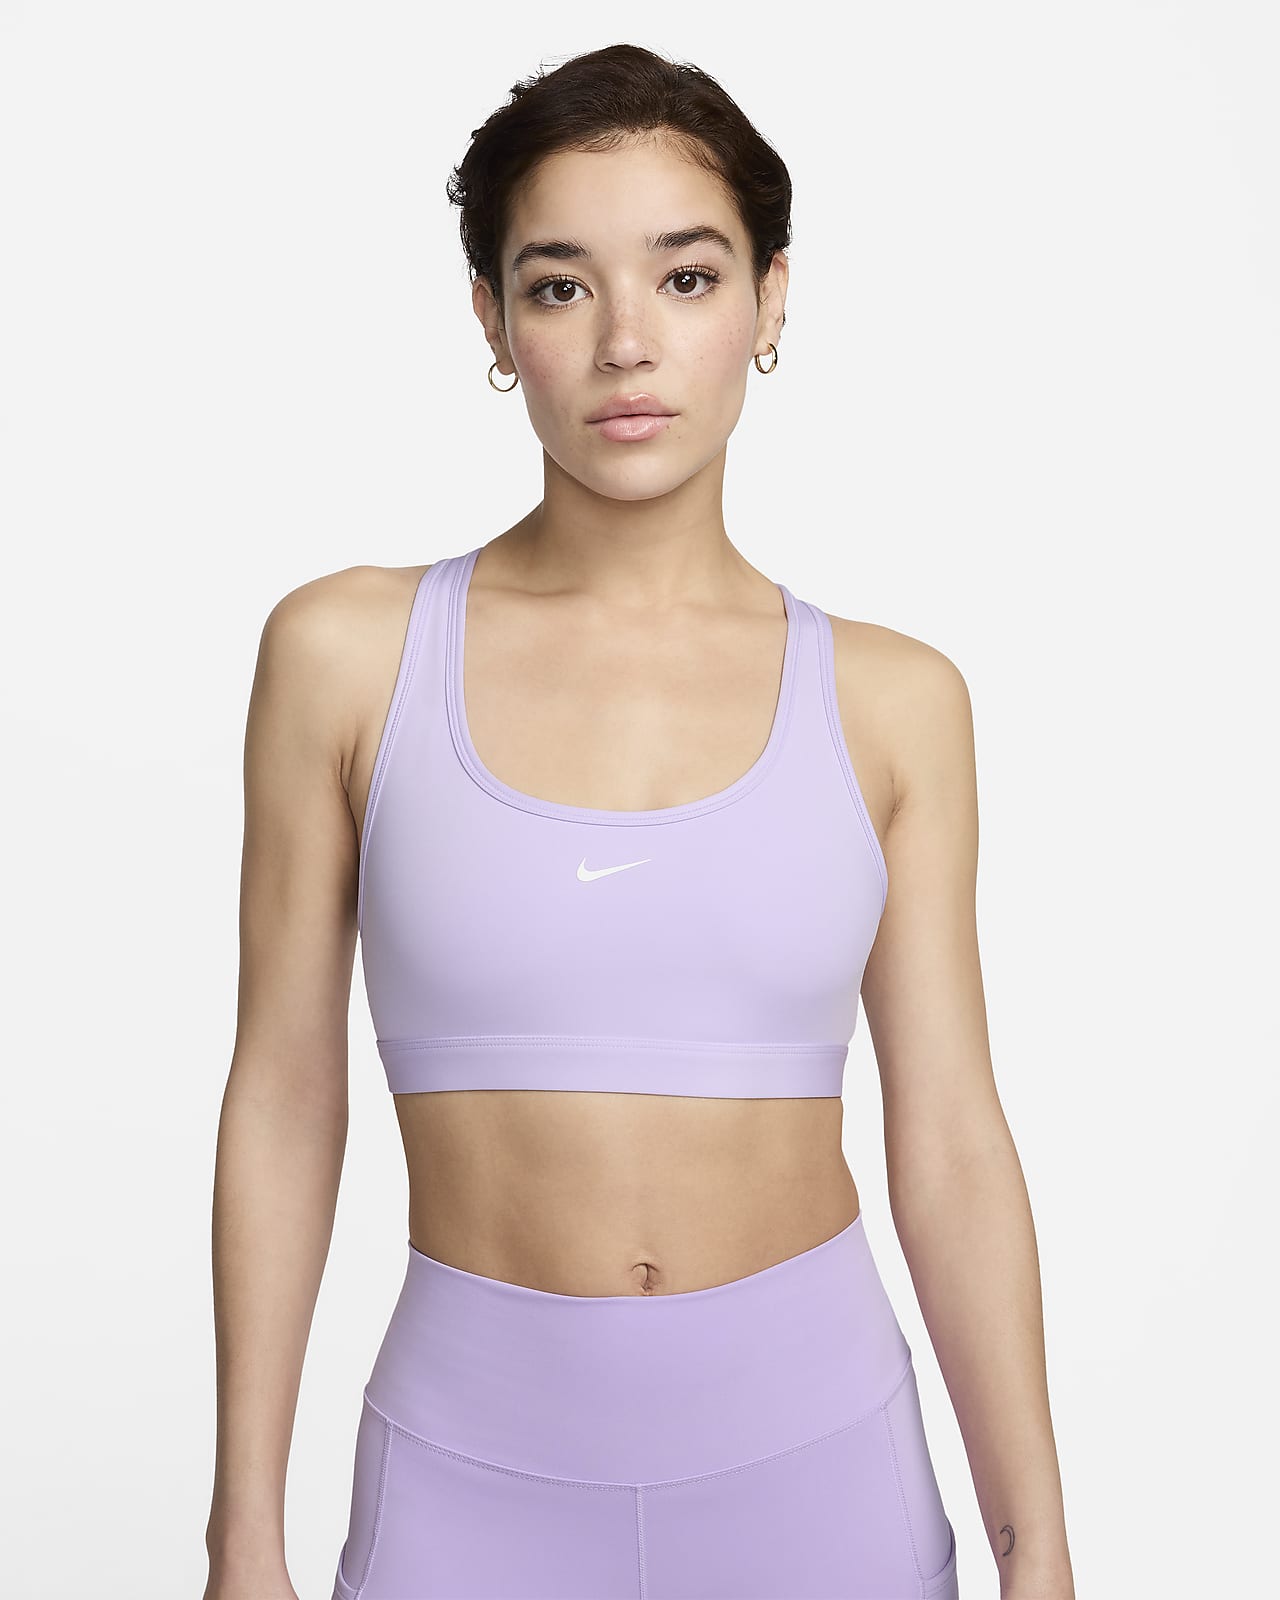 NWT Nike Women's Favorites Strappy Light Support Sports Bra Size S